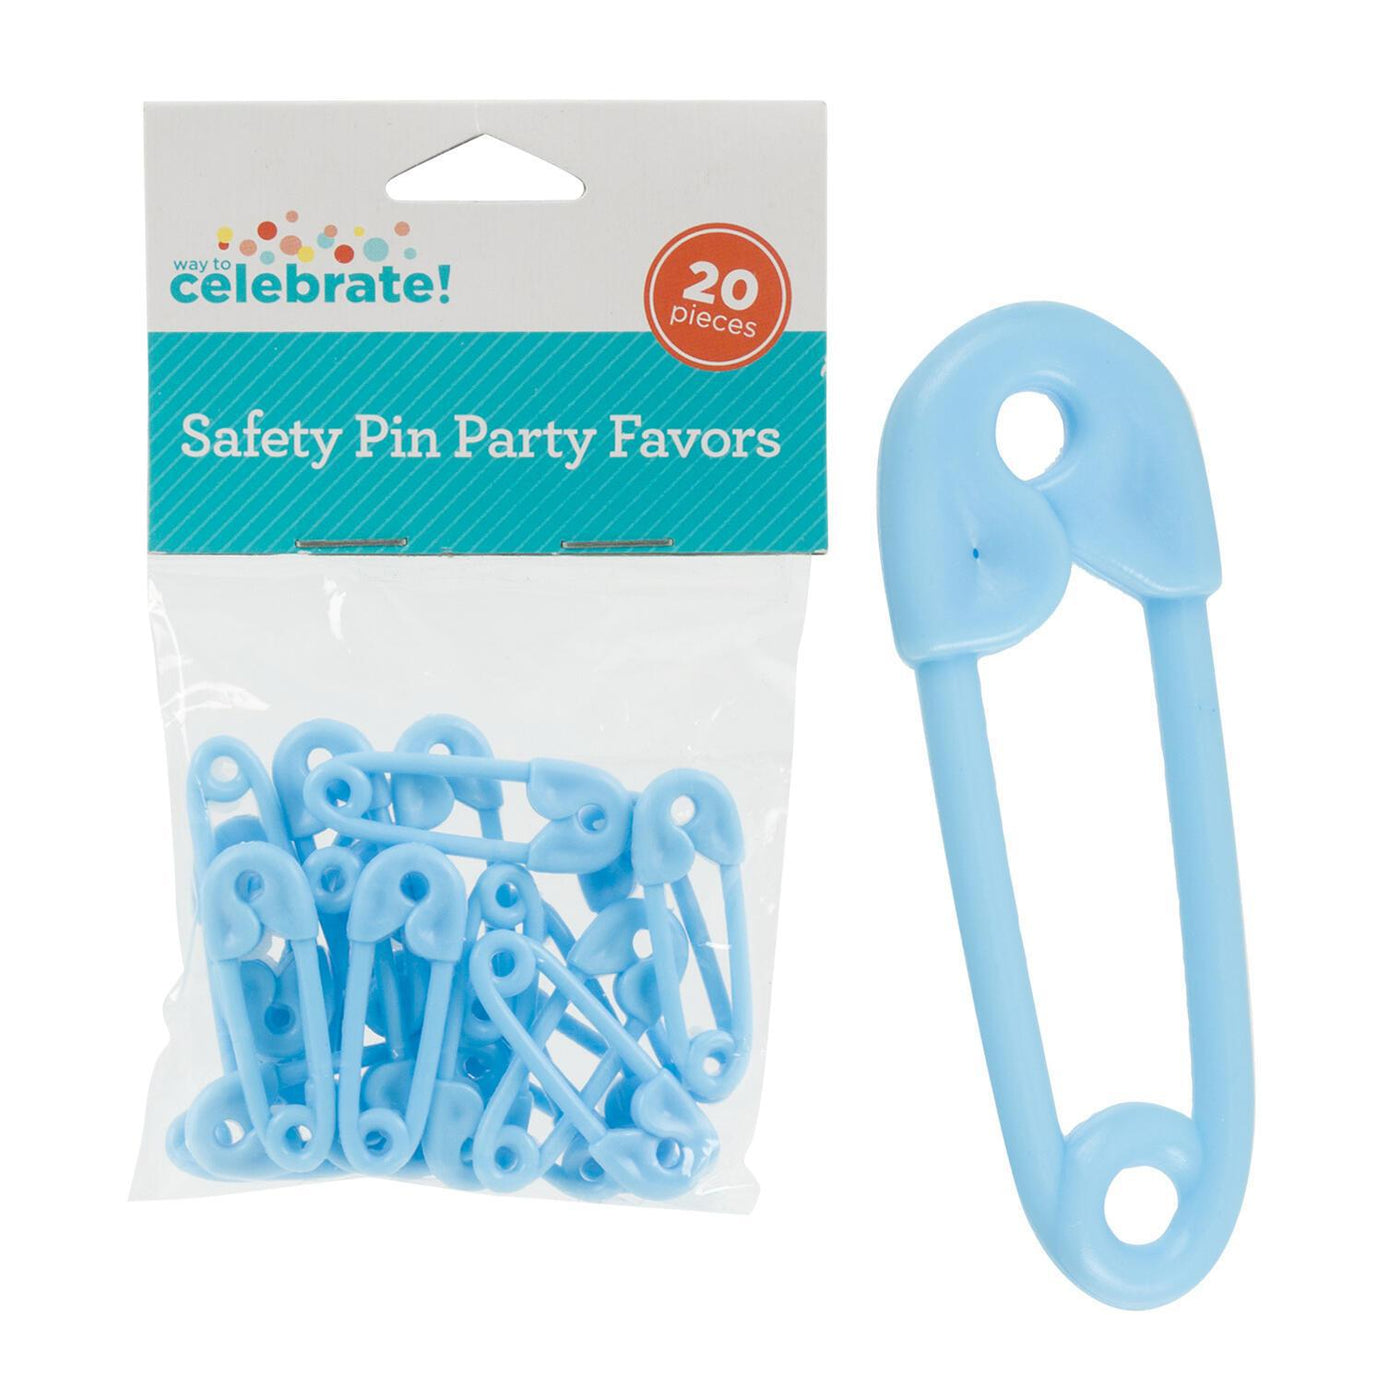 Blue Safety Pin Party Favor (20 Count)